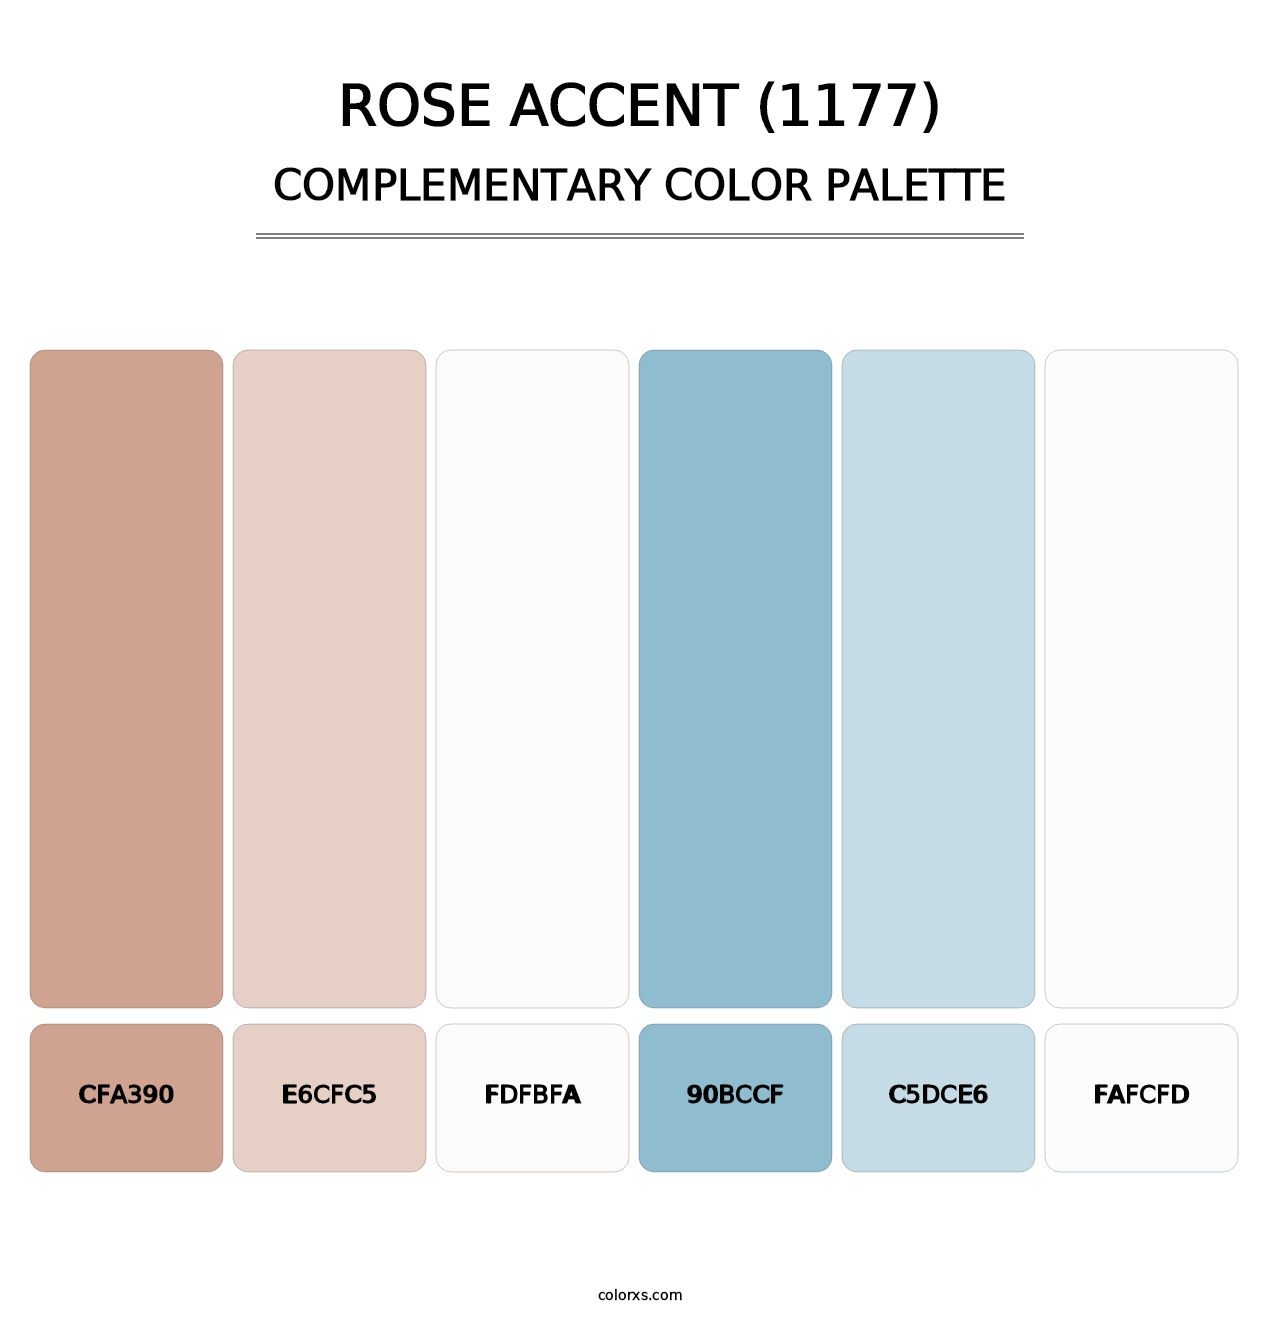 Rose Accent (1177) - Complementary Color Palette